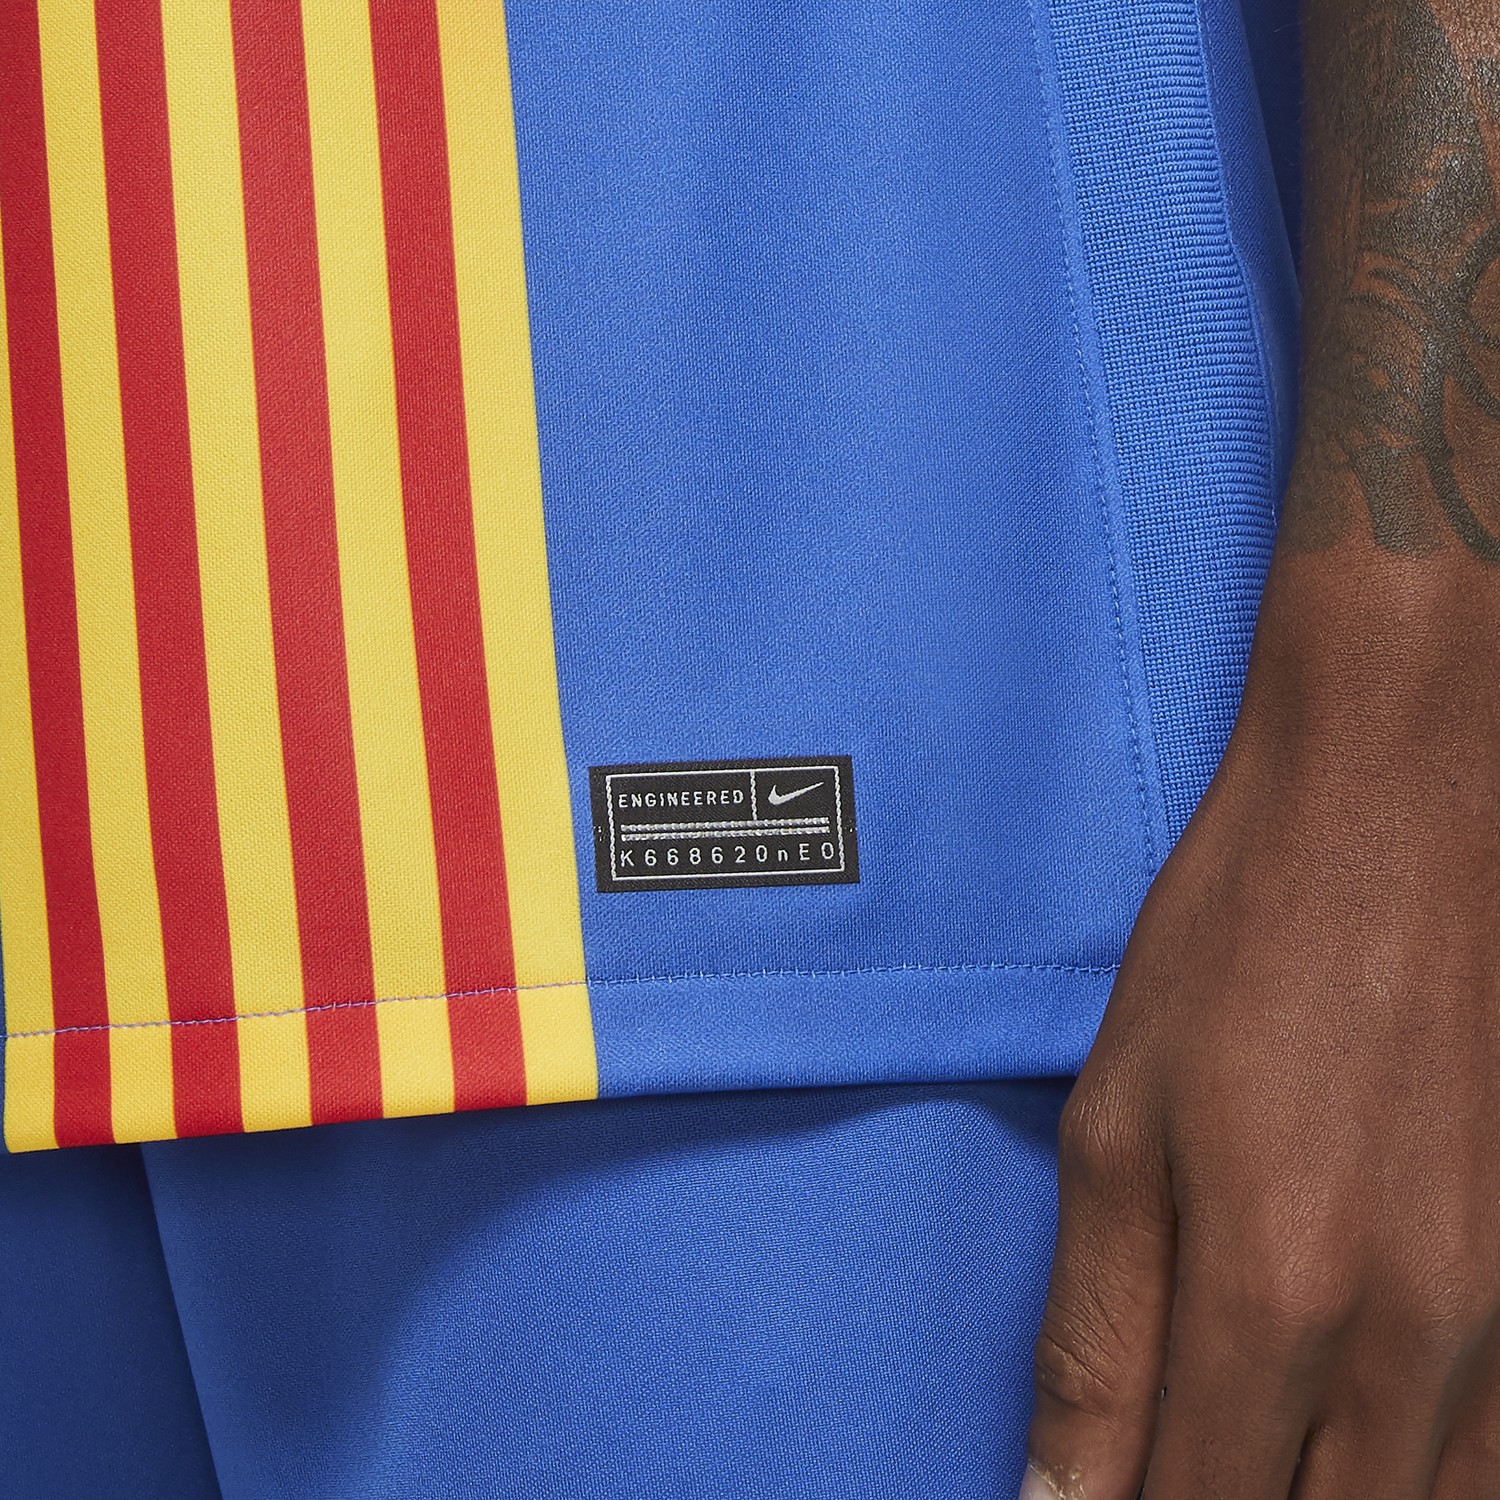 Maillot FC Barcelone Clasico 2020/21 sur Foot.fr